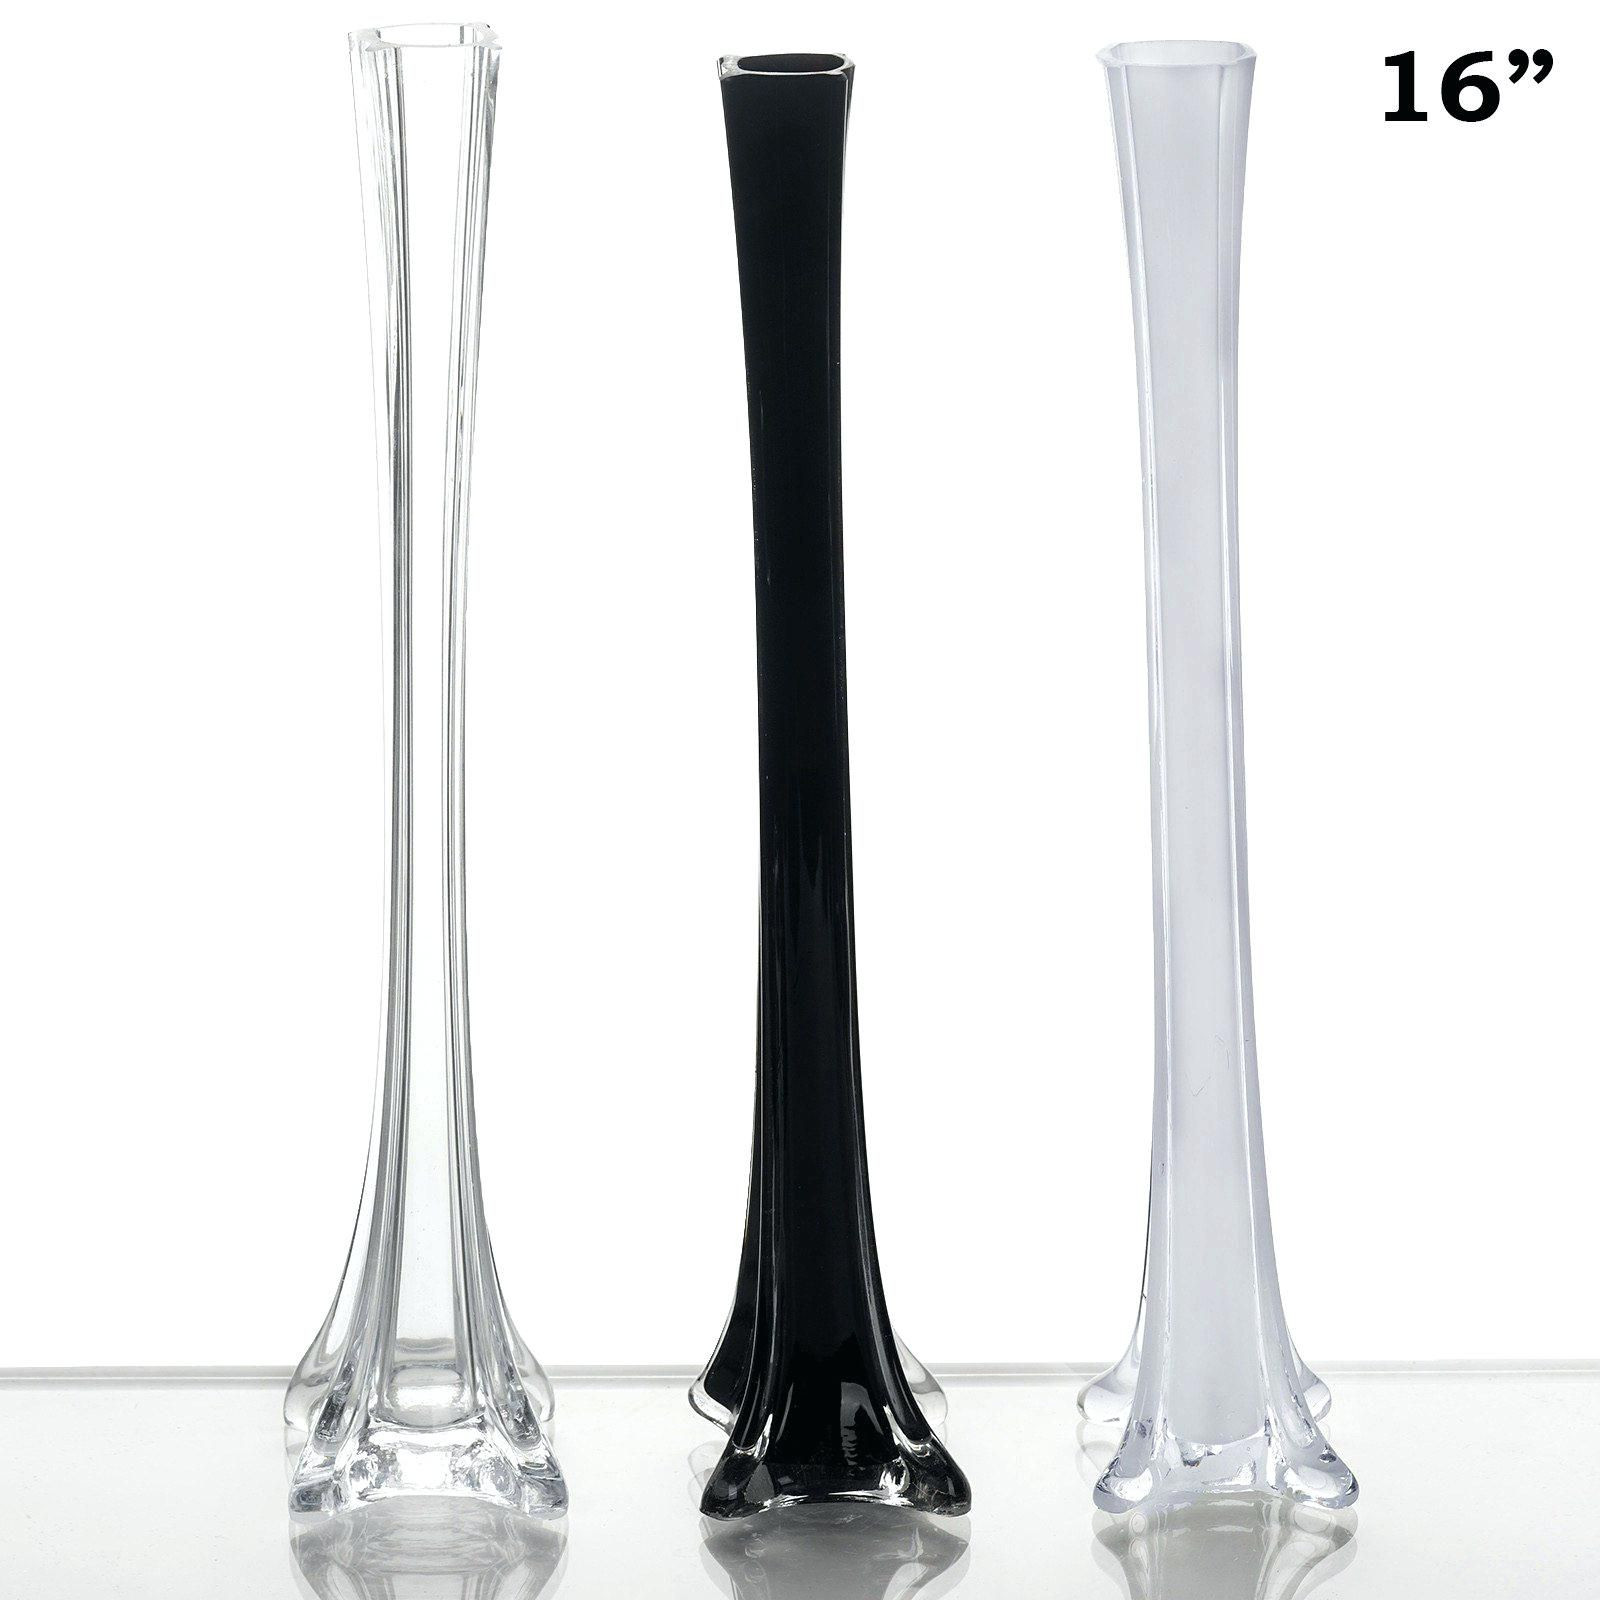 12 Great White Plastic Vases wholesale 2024 free download white plastic vases wholesale of 40 glass vases bulk the weekly world within gallery plastic eiffel tower vases wholesale drawings art gallery